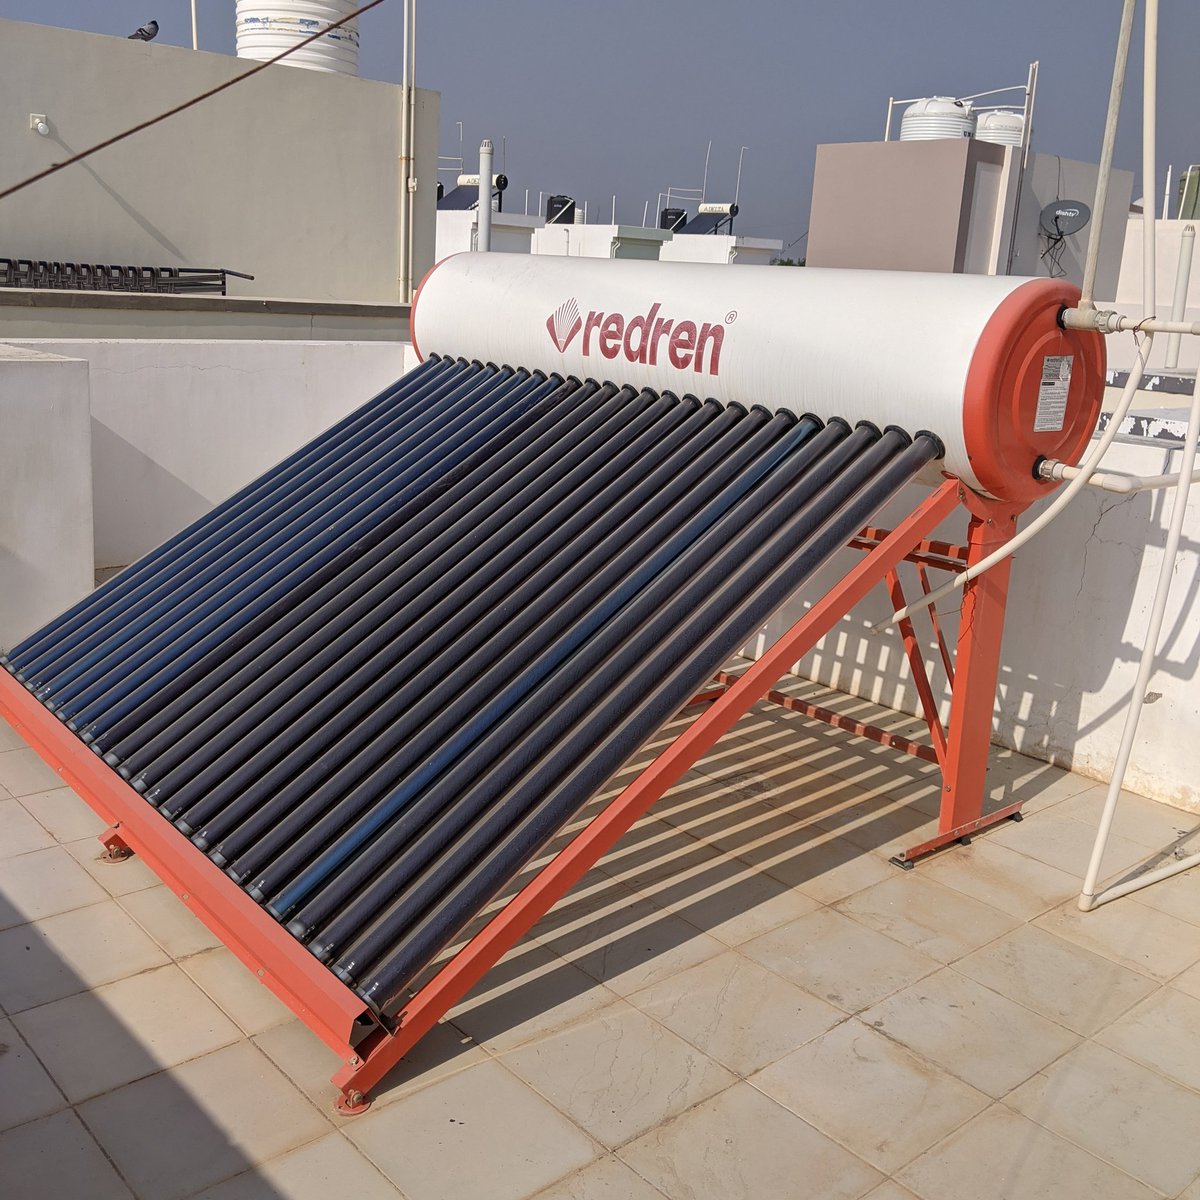 Cost of Solar Heater: 36,000Cost of Electric Geyser: 5,000.The electric geyser will obviously also consume electricity and assuming most houses here have two, it would take 3-5 years to recover the cost. No maintenance required for the solar heater and it is a one-time cost.